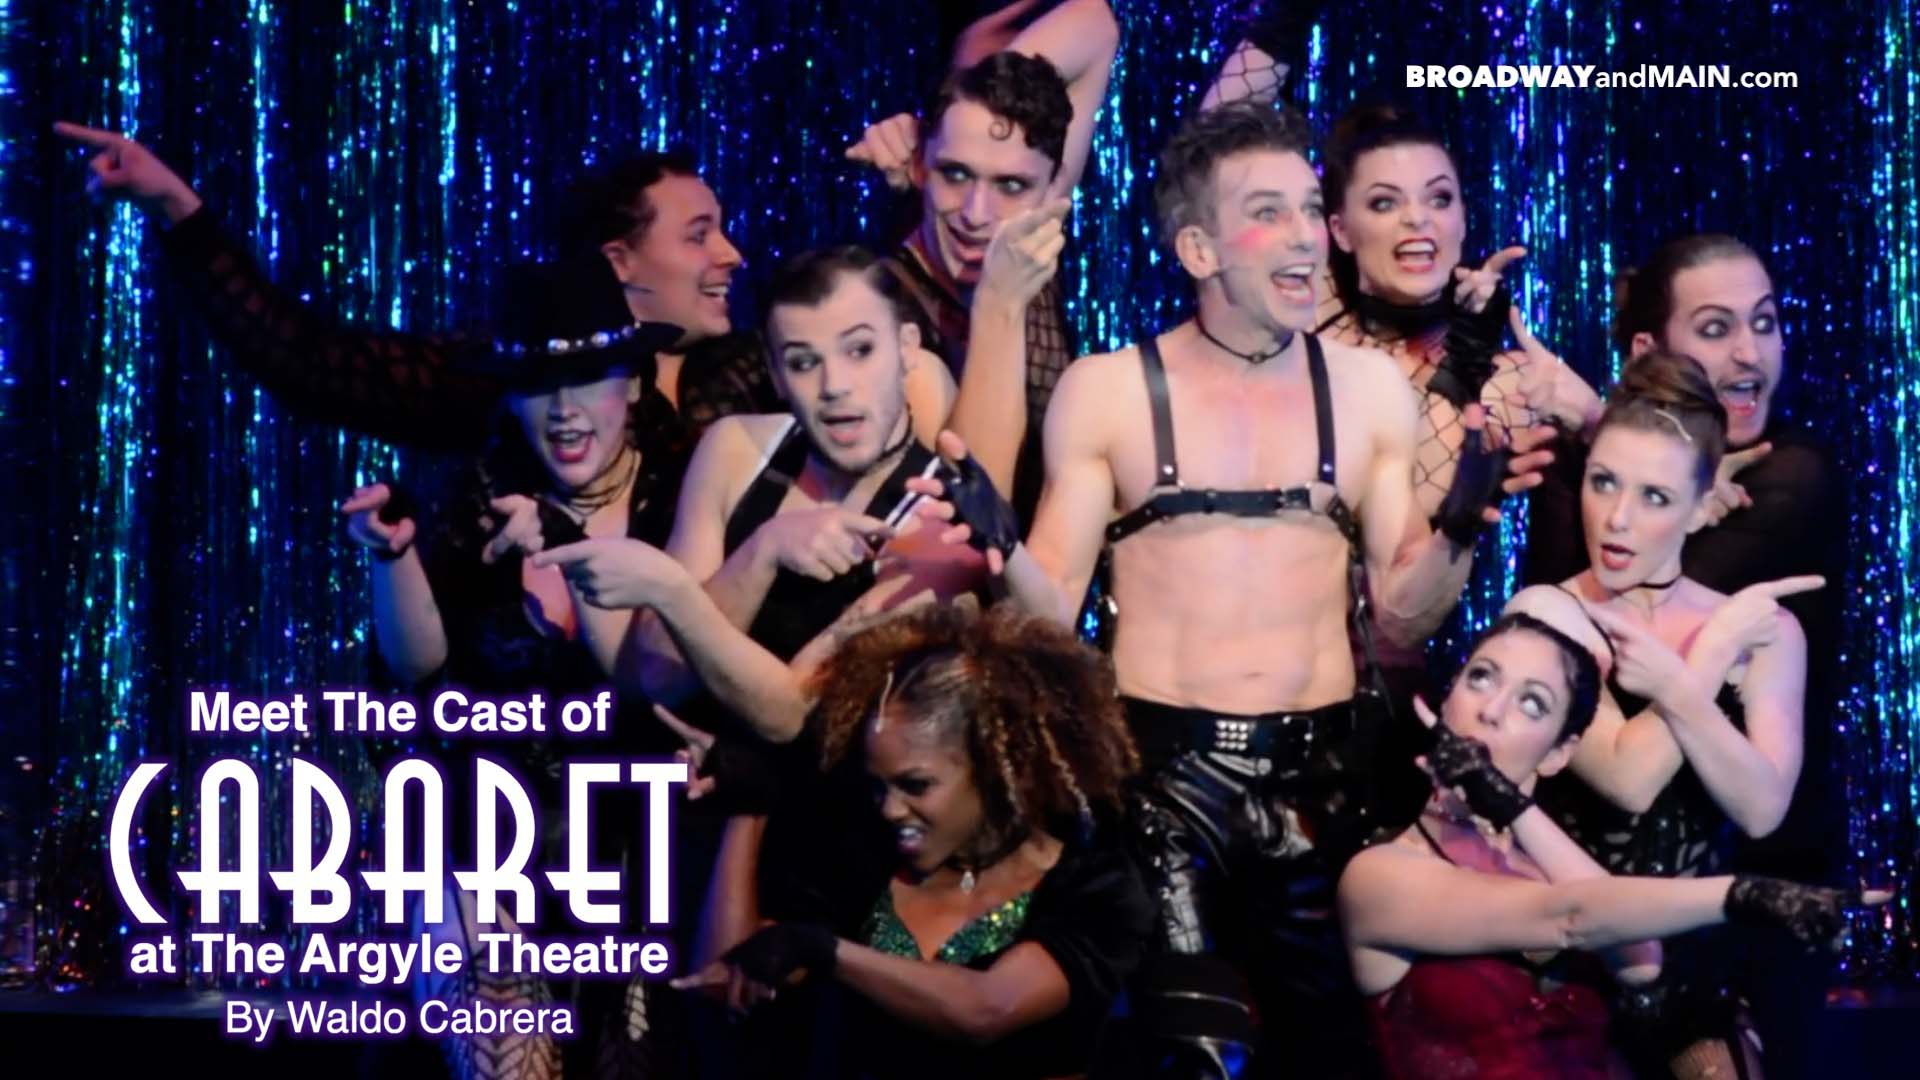 Meet The Cast of Cabaret (Take 2) at The Argyle Theatre